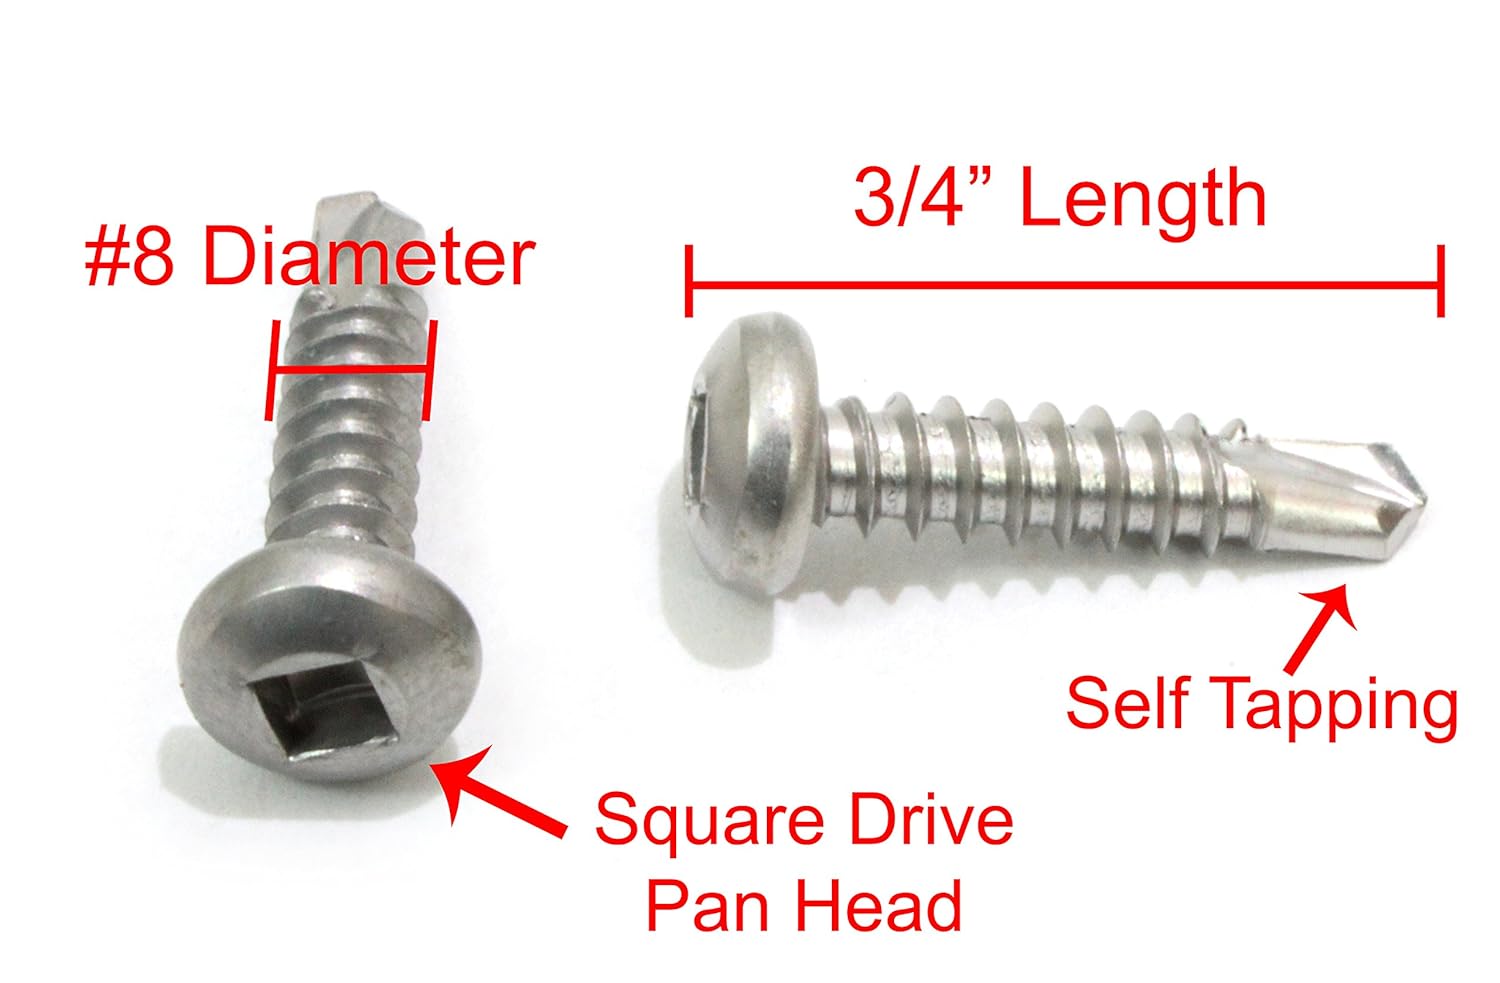 Generic 10 x 3/4" Stainless Pan Head Square Drive Sheet Metal Self Tapping Drilling Screws, (100pc) 410 Stainless, Corrosion Resis